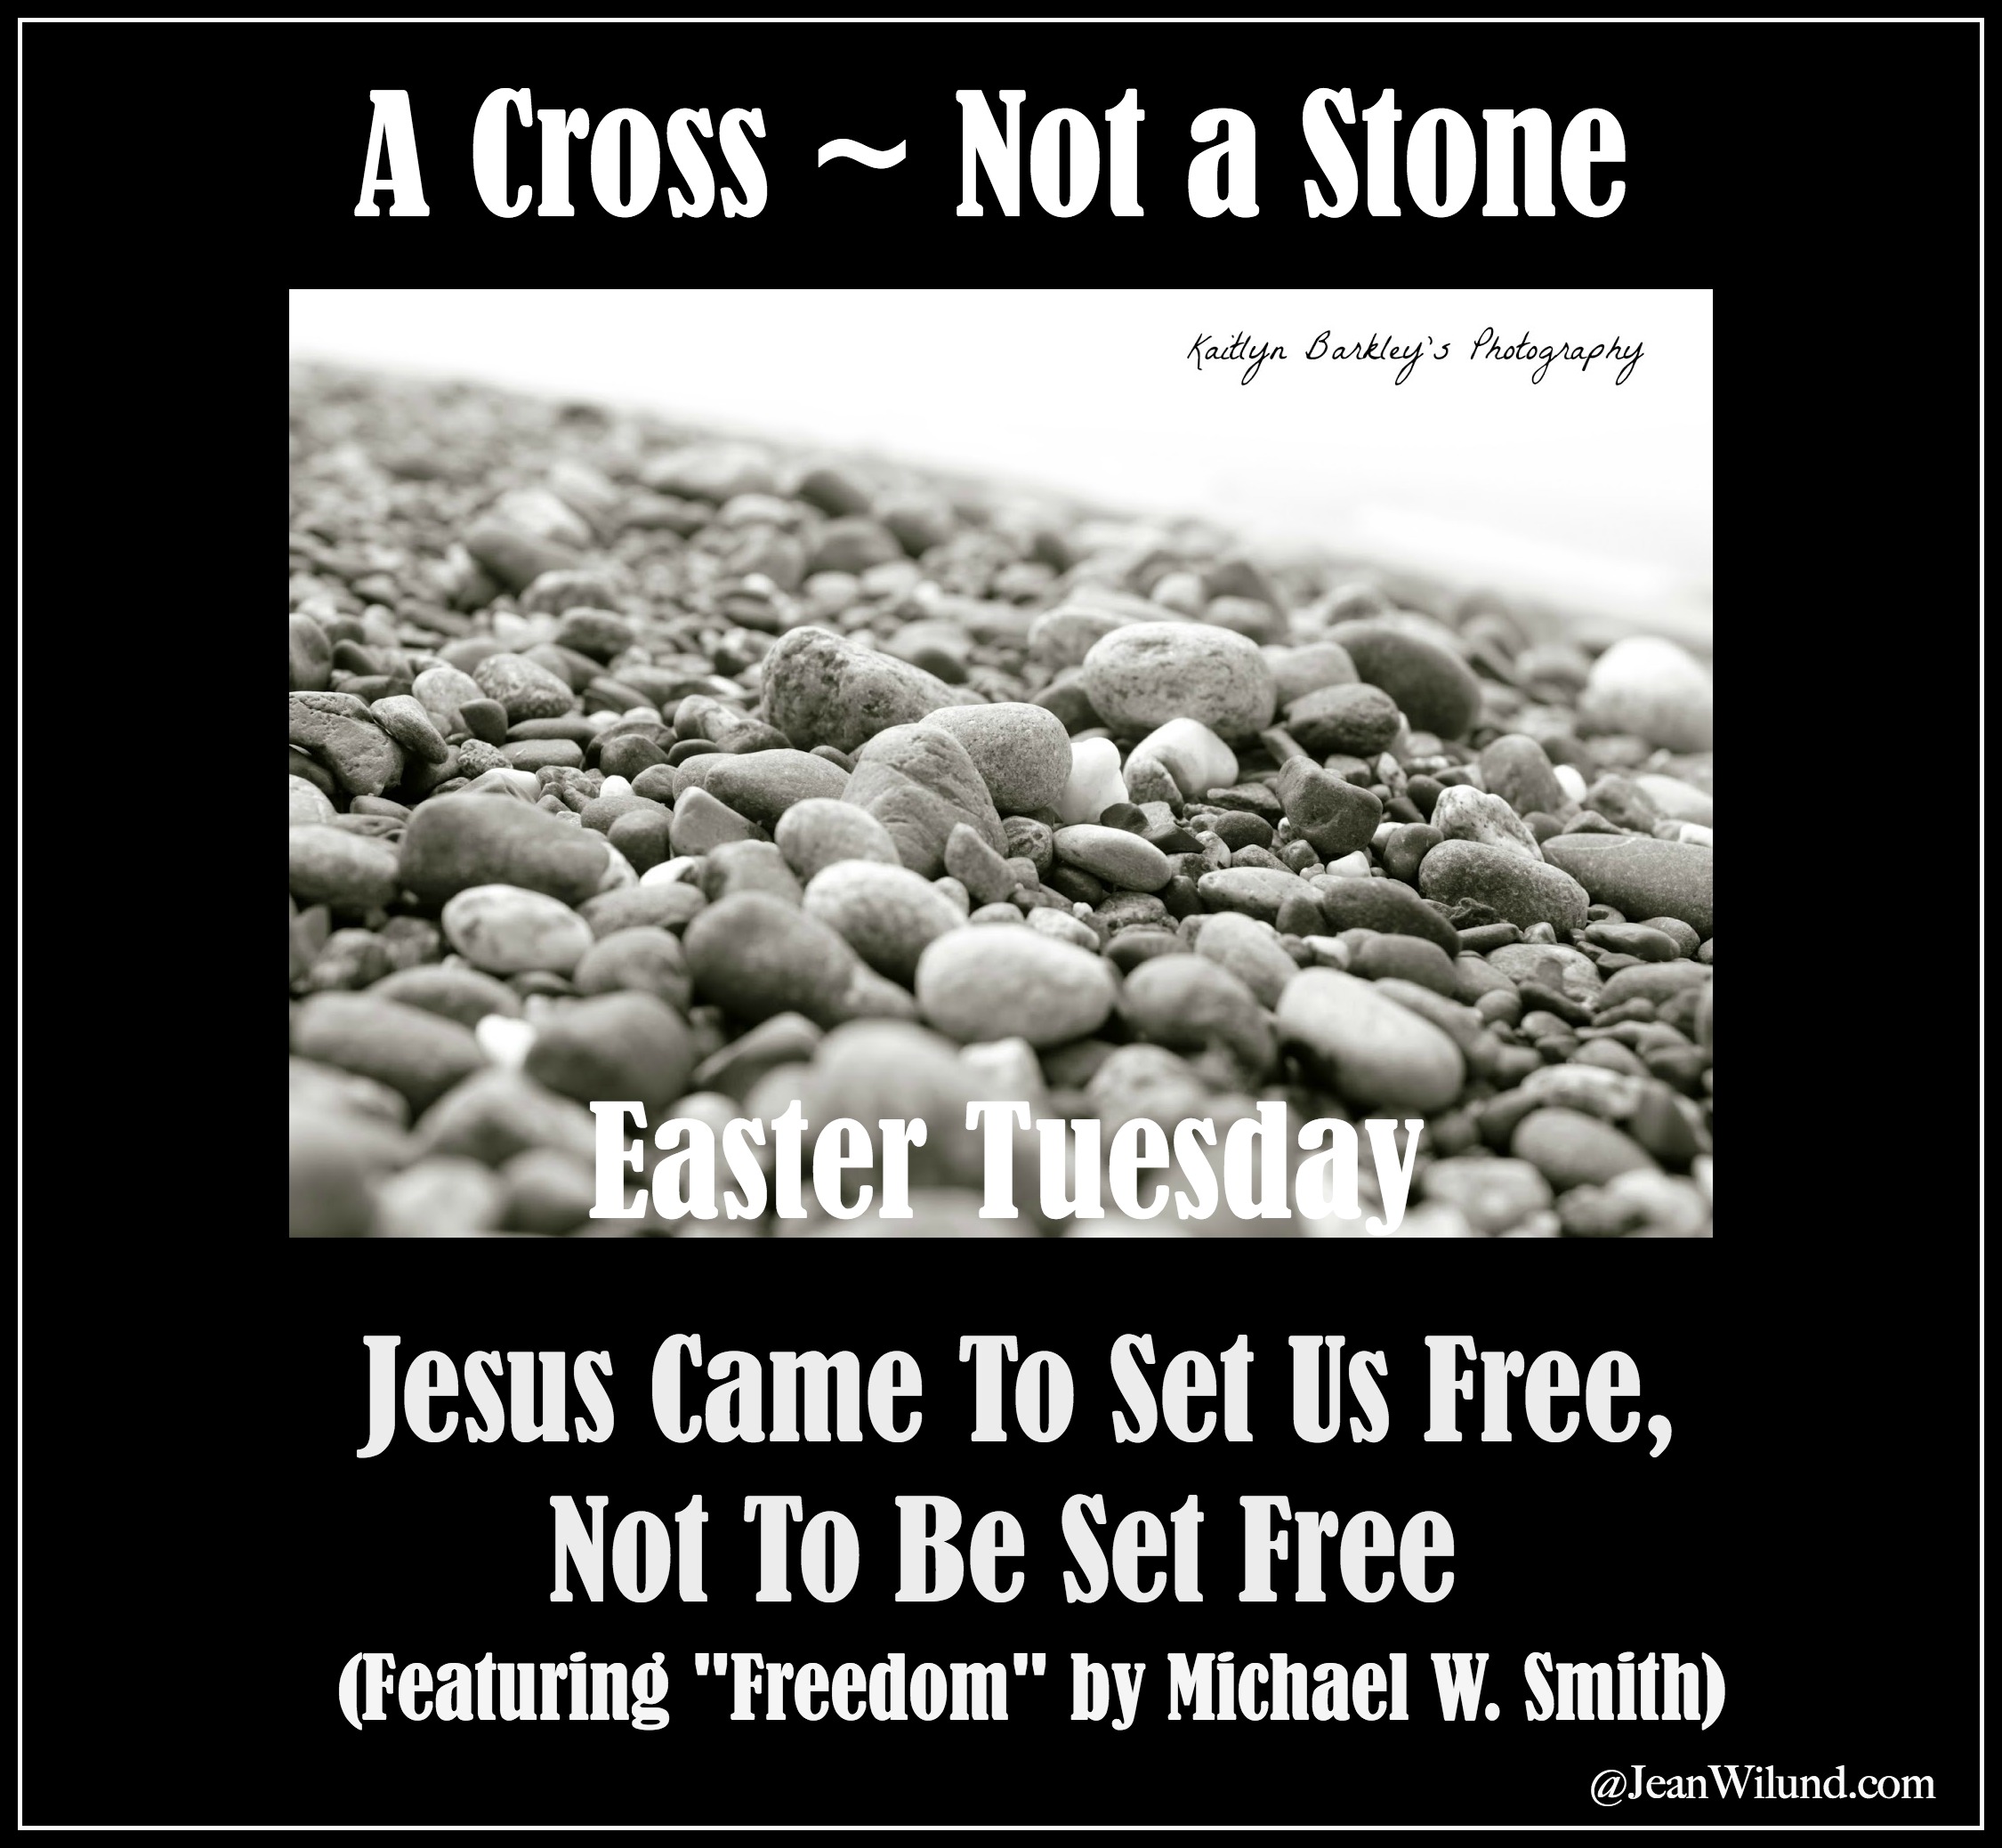 A Cross, Not a Stone Because Jesus Came to Set Us Free, Not Be Set Free